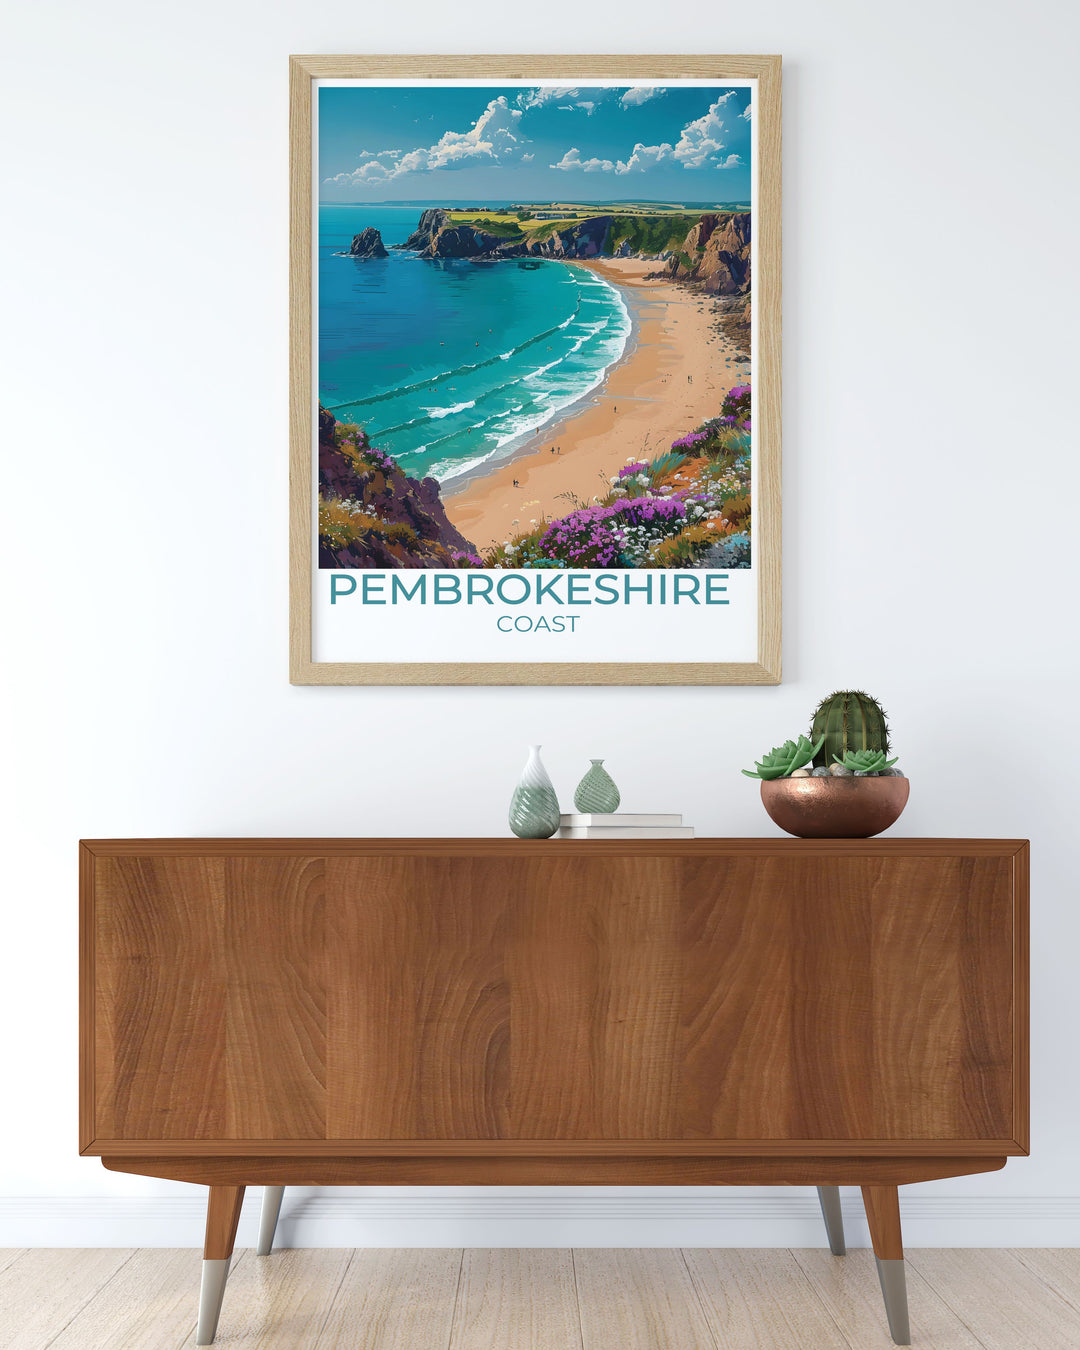 Pembrokeshire Coast travel poster featuring Barafundle Bay in a vintage style capturing the essence of this hidden gem with lush greenery and breathtaking views ideal for lovers of nature and vintage travel prints.